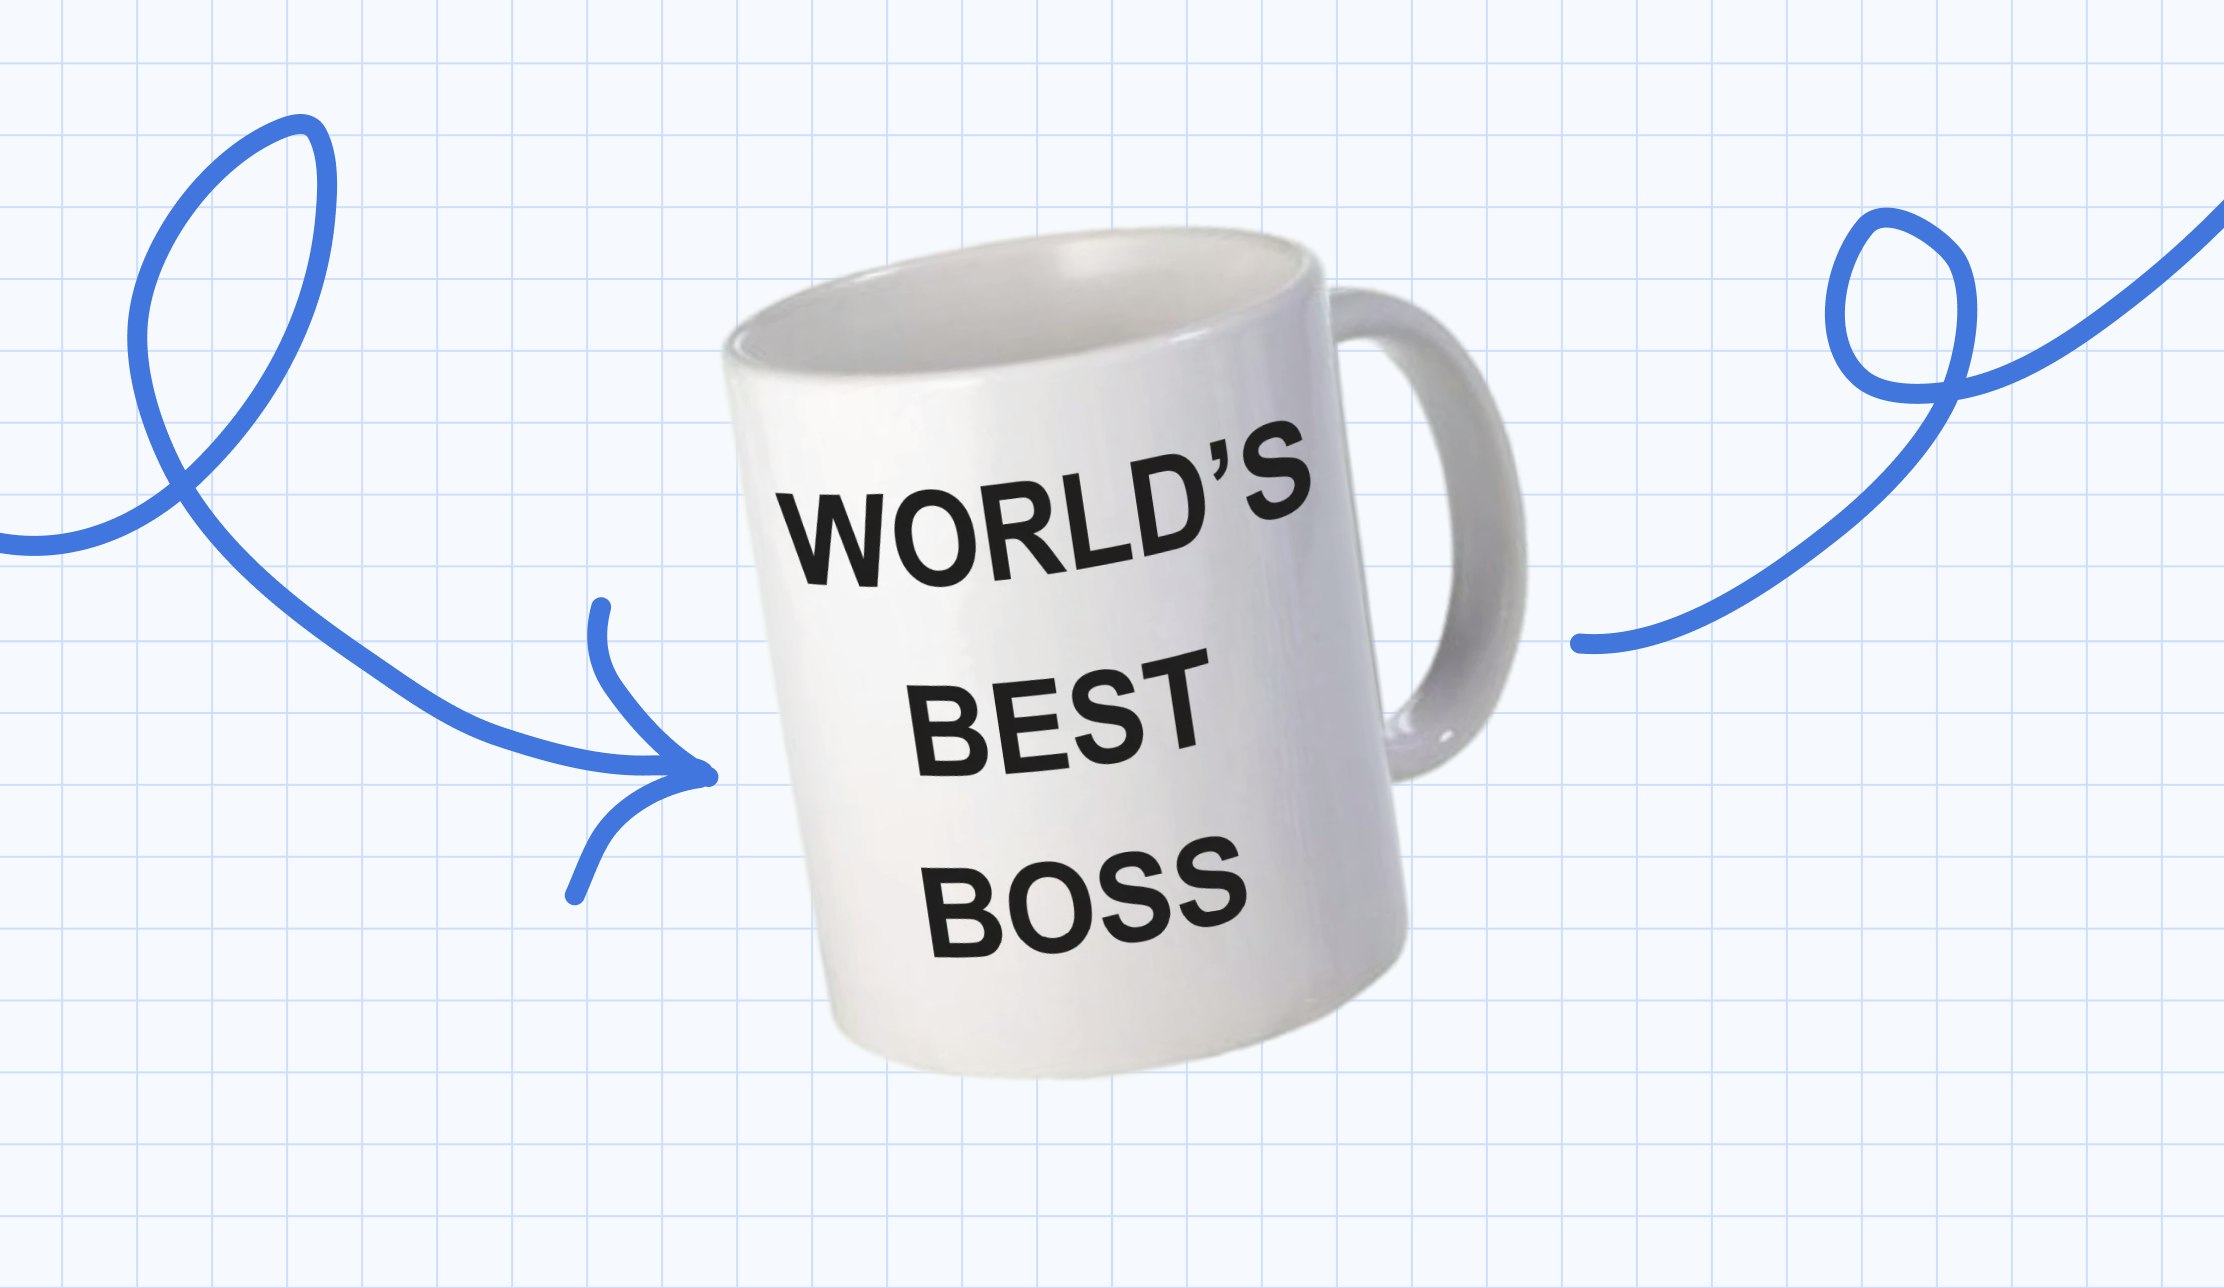 Mug with the words "World's best boss" written on the front.